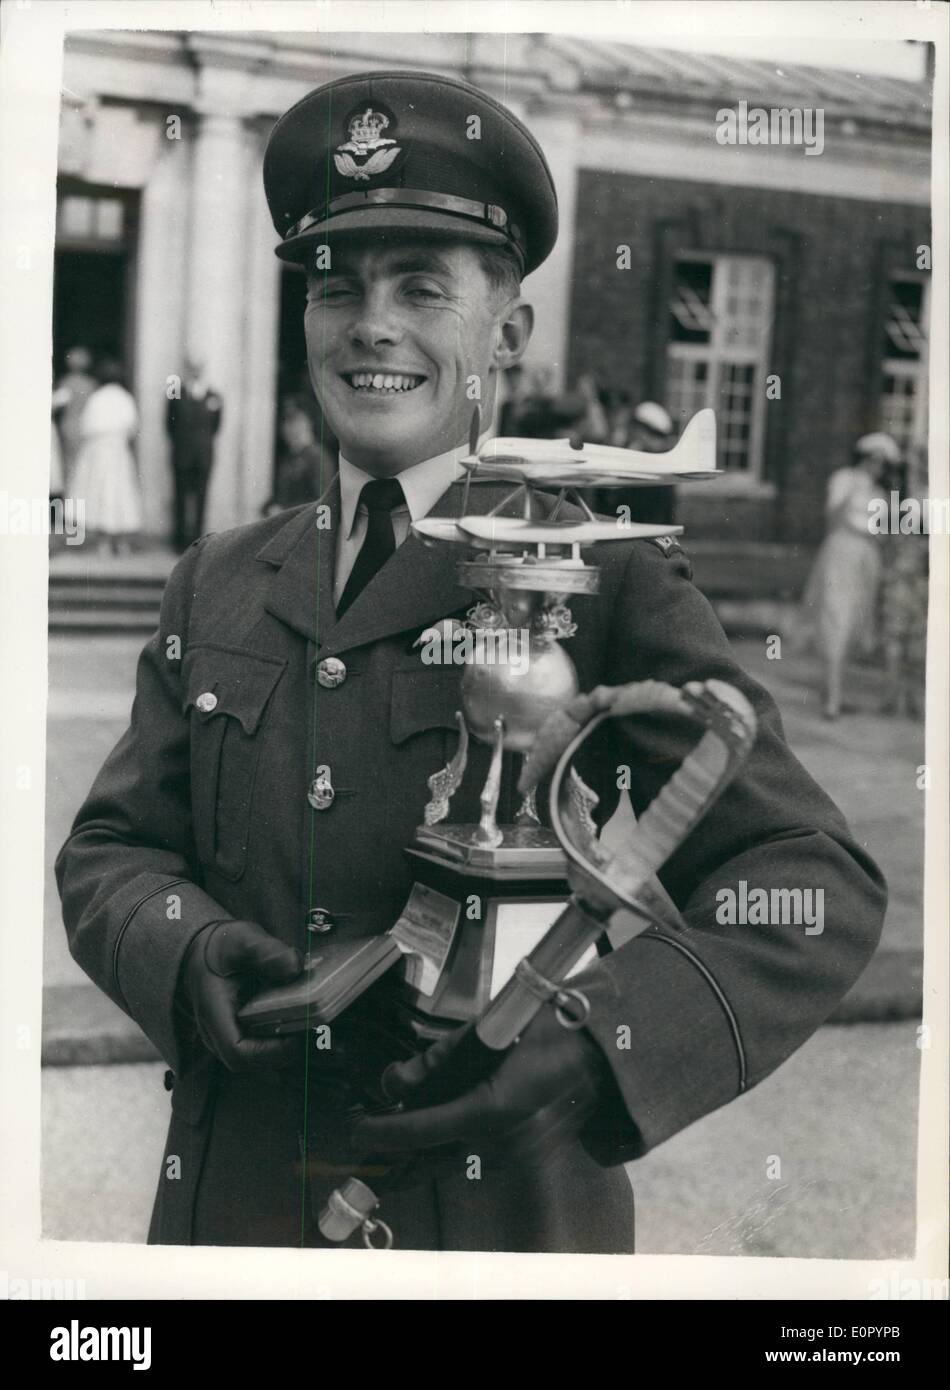 Jul. 07, 1957 - FIRST SEA LORD TAKES SALUTE AT RAF PASSING OUT PARADE. THE BEST -ALL-ROUND-CADET COMES FROM NEW ZEALAND. EARL MOUNTBATTEN of Burma - the Admiral of the Fleet - was the reviewing officer today at the Passing Out Parade of No. 70 Entry - Royal air Force College, Cranwell. Keystone Photo Shows:- Senior under officer T.E. Enright of Dunedin, New Zealand - seen after having received the Sword of Honour, as the best all-round cadet; the QUEEN'S Medal (for the cadet obtaining highest aggregate marks in all subjects ) - and the R.M Stock Photo